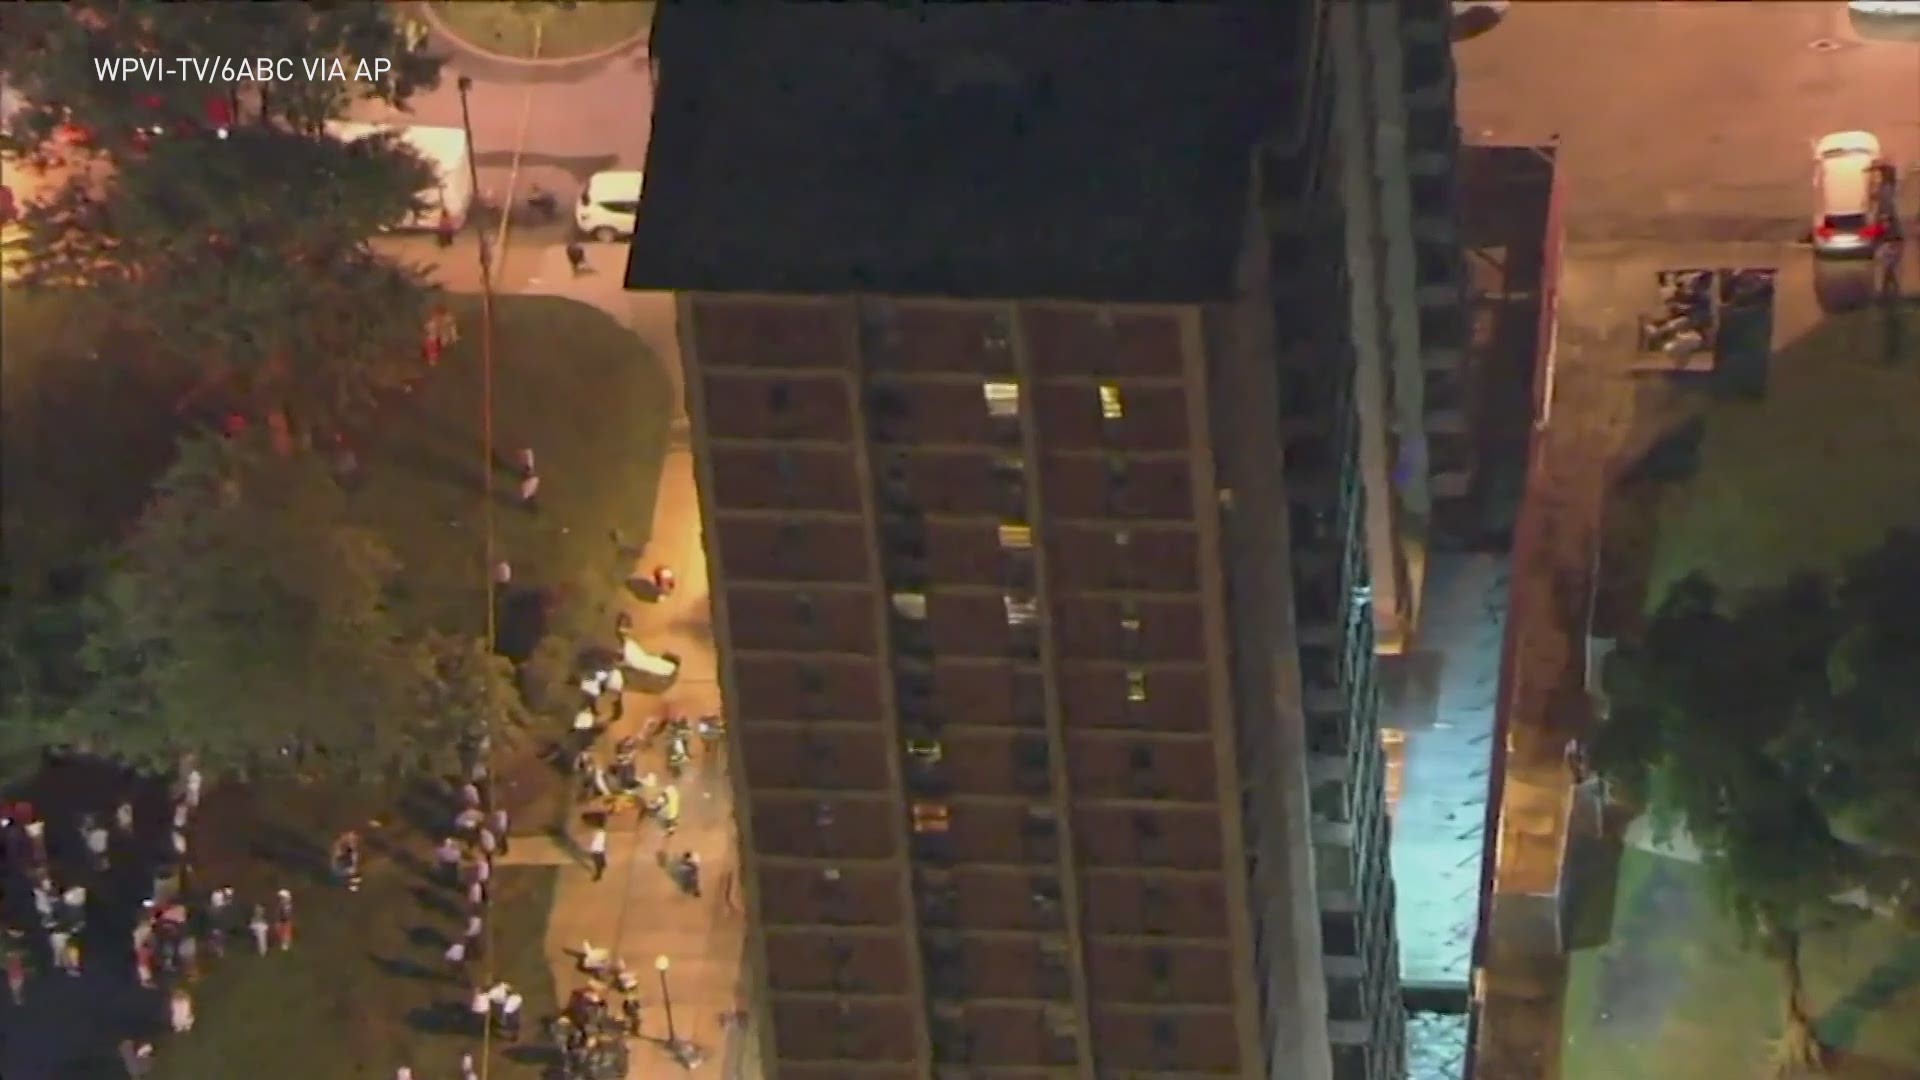 Video from the WPVI-TV helicopter in Philadelphia shows a man scaling down the side of a high rise building during a fire on Thursday night.